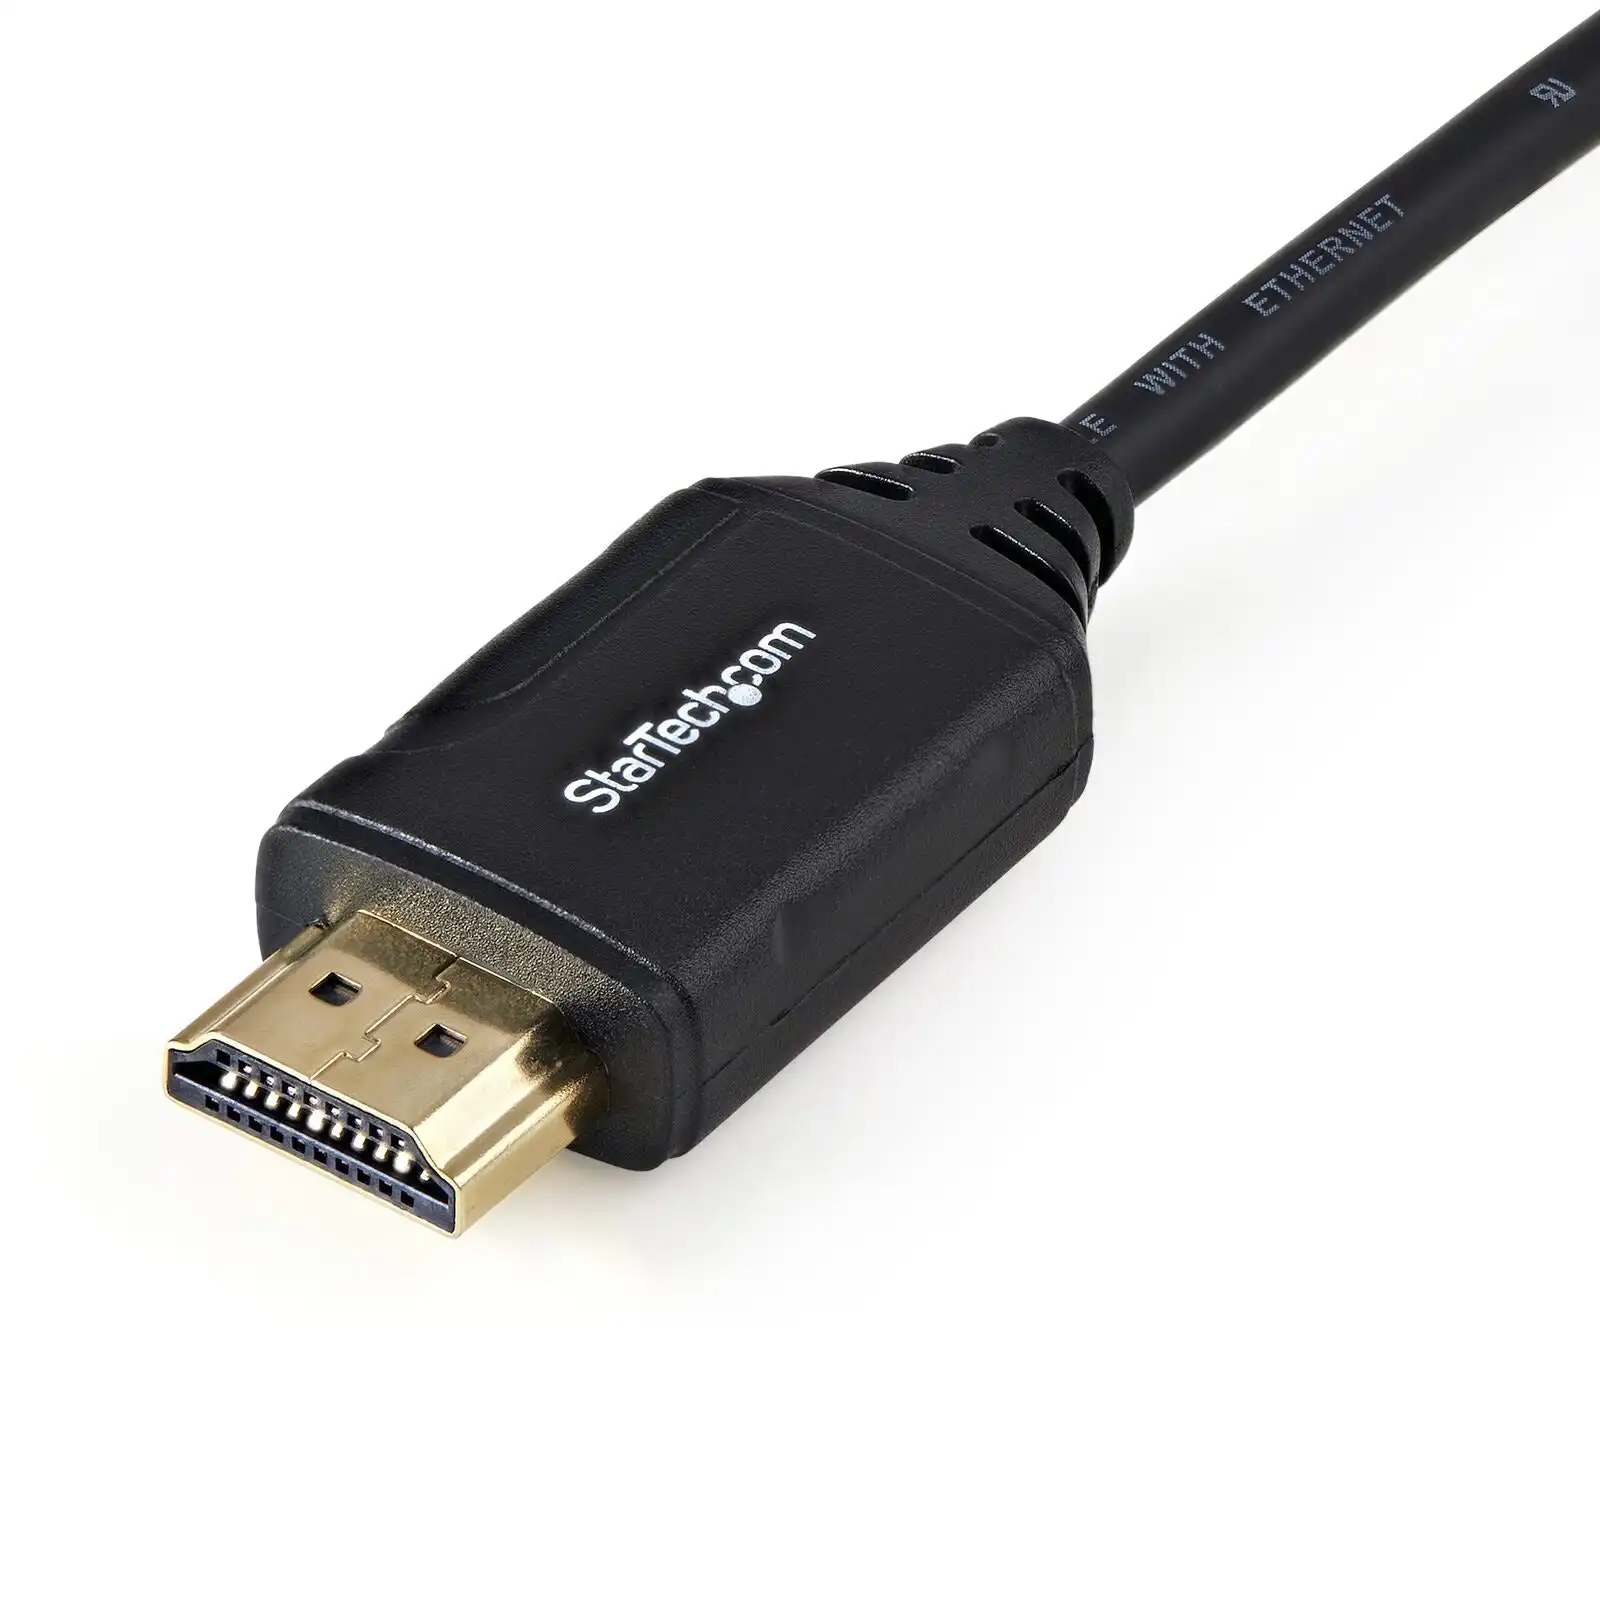 Star Tech 4K/Ultra HD Premium HDMI High Speed HDR Cable w/ Ethernet 0.5m Black